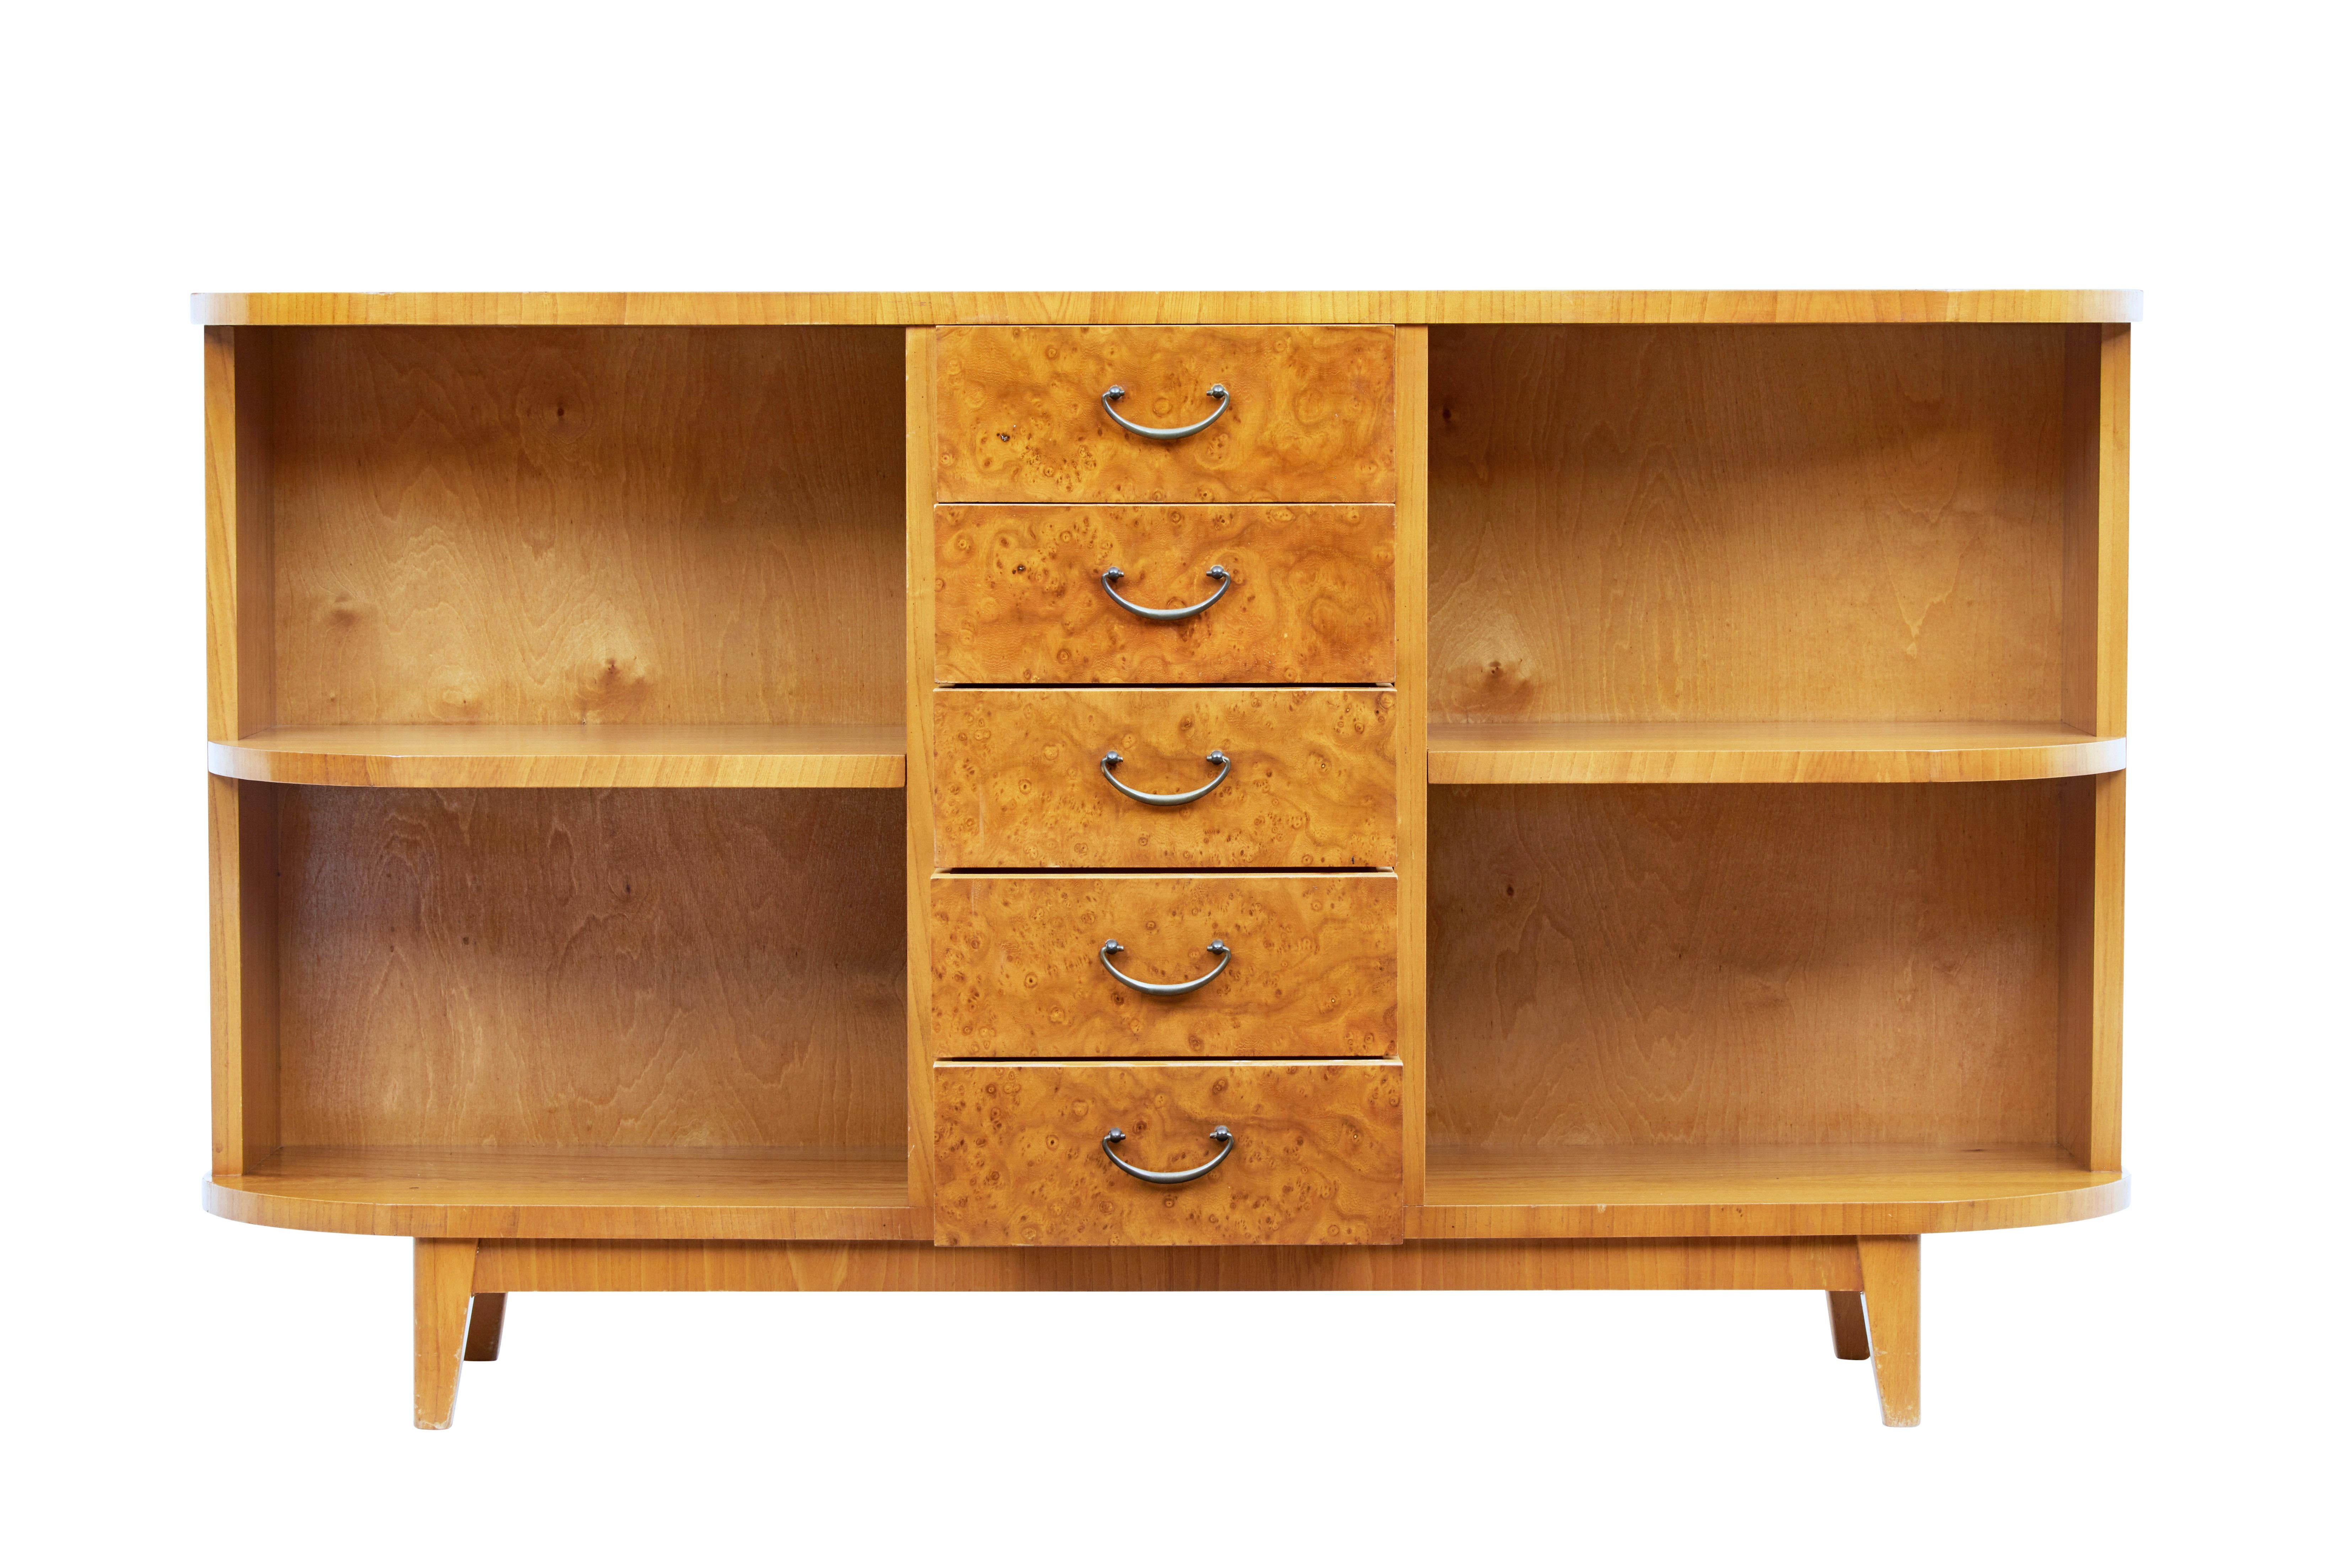 Good quality low open bookcase, circa 1940.

Central bank of 5 drawers veneered in burr birch and fitted with brass loop handles. Either side of the drawers are a single fixed shelf for book storage.

Rounded ends echo a influence from the art